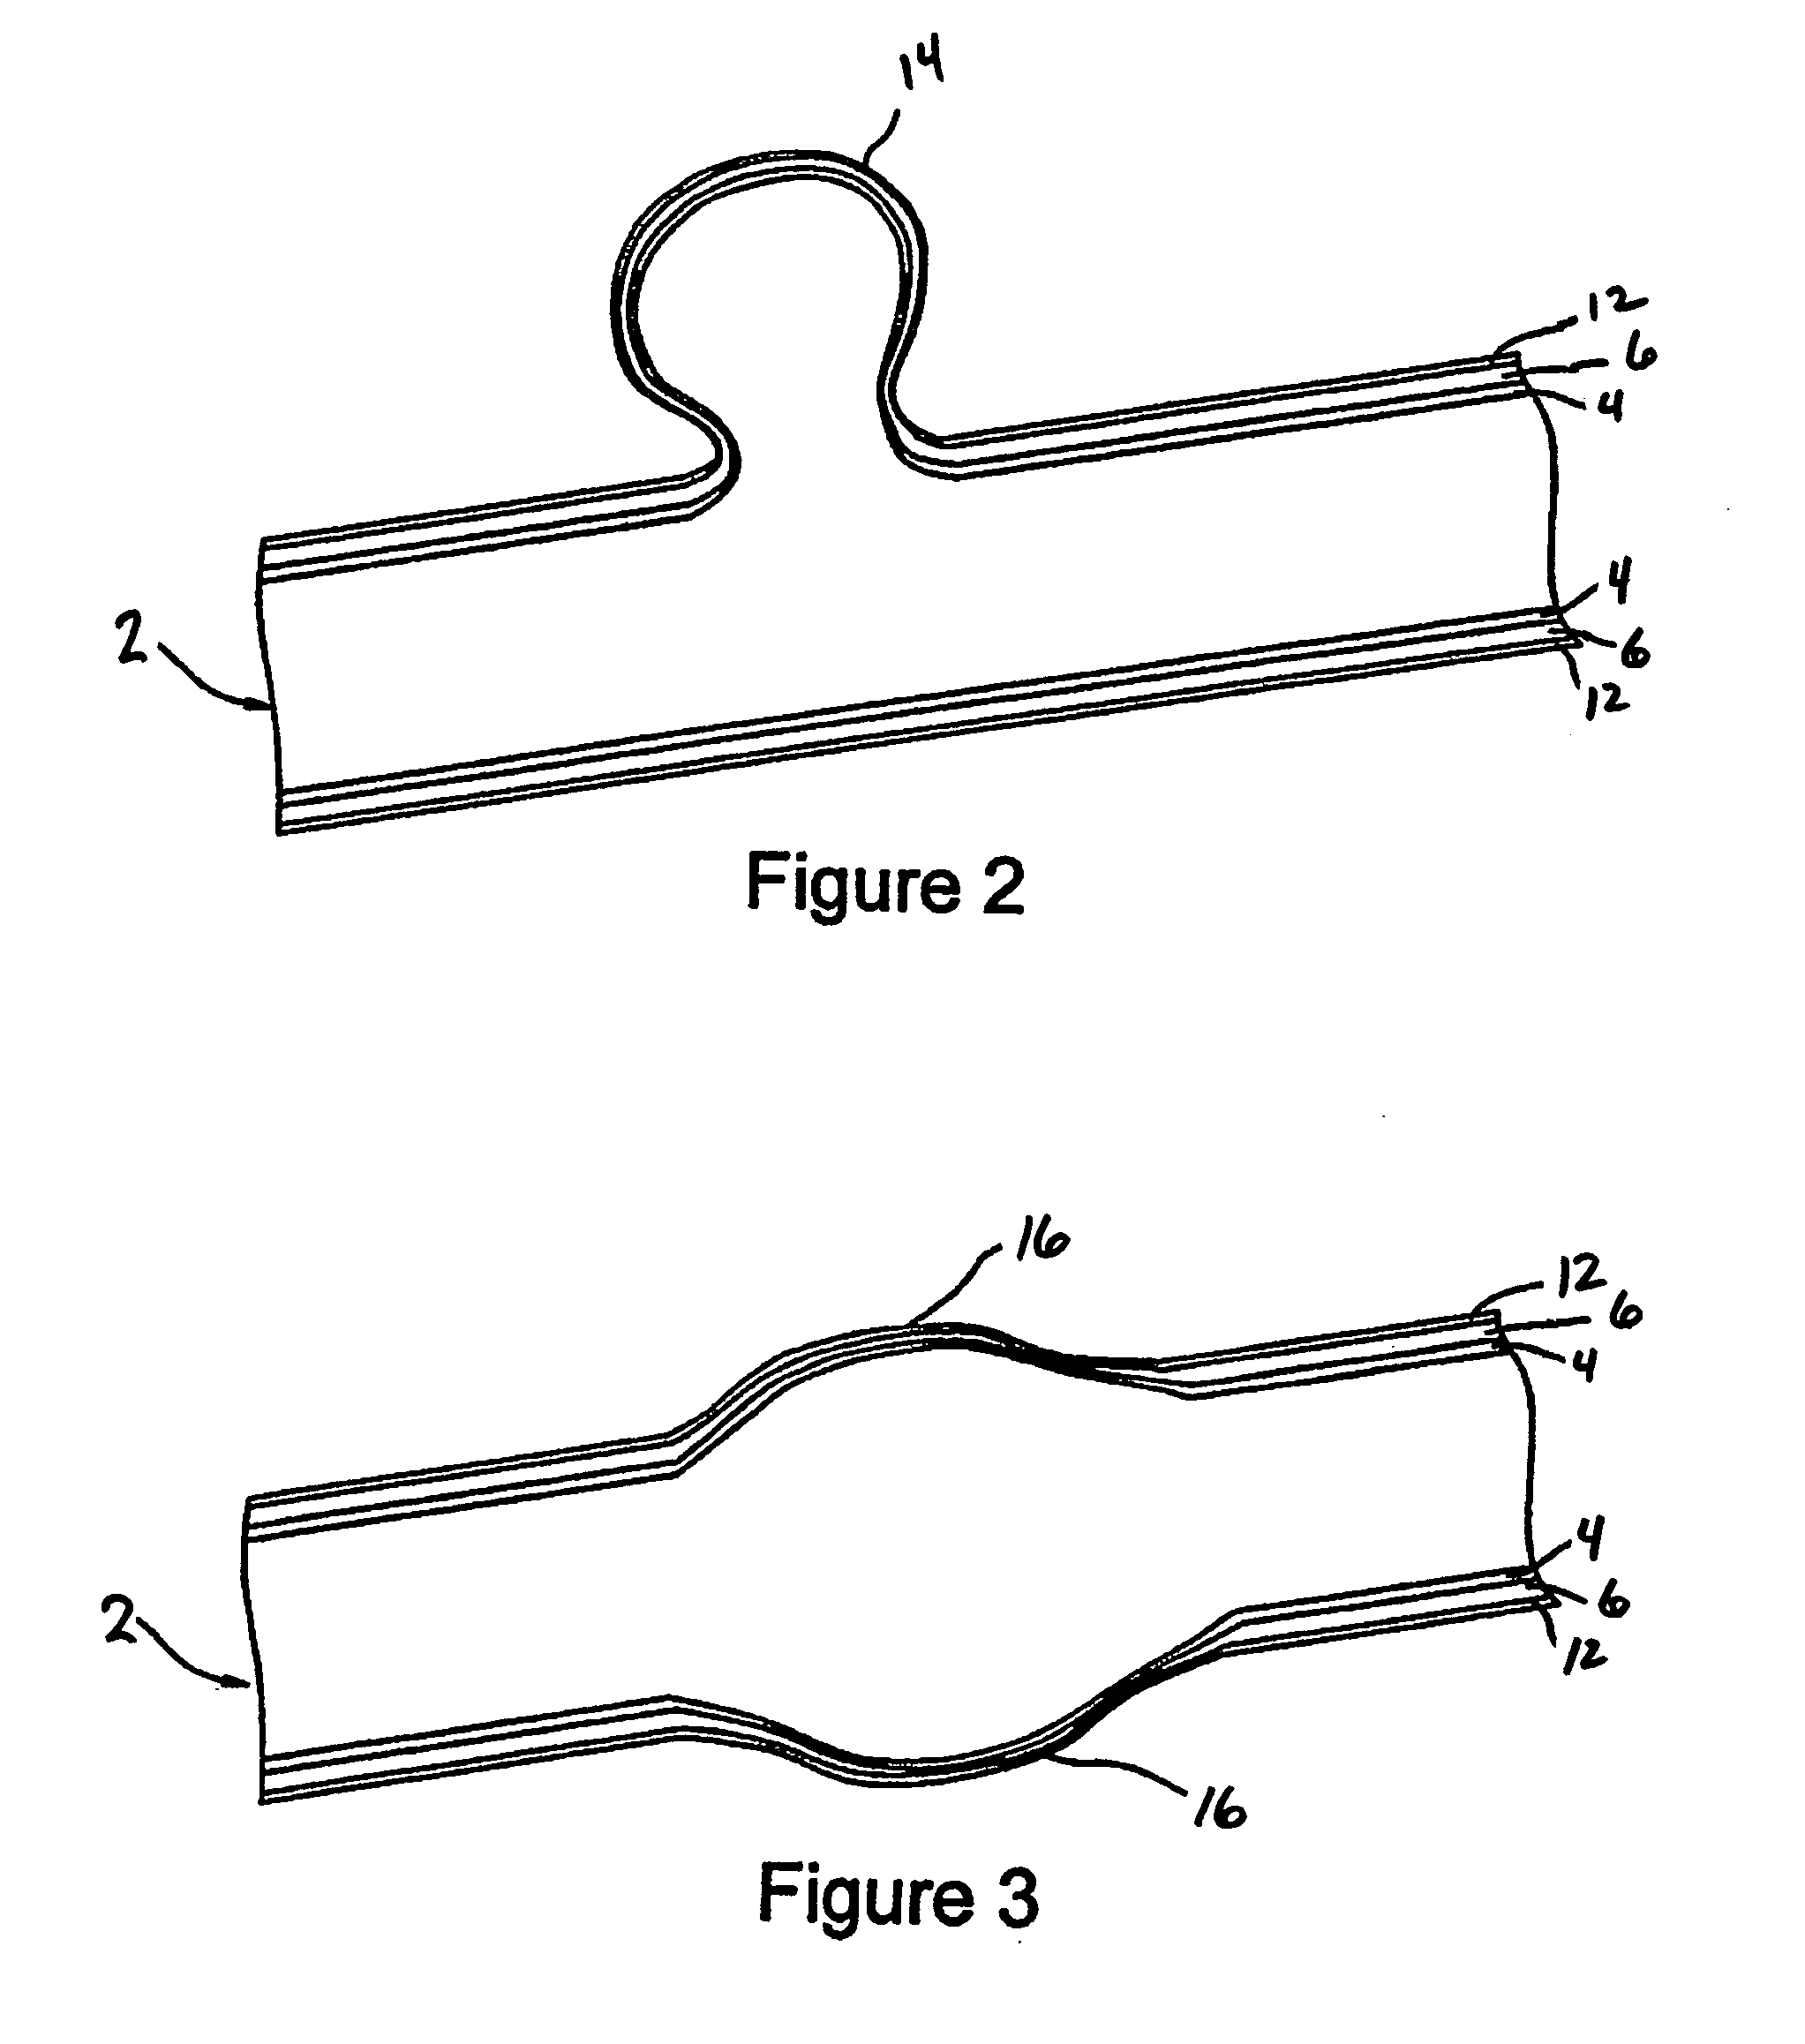 Aneurysm treatment devices and methods